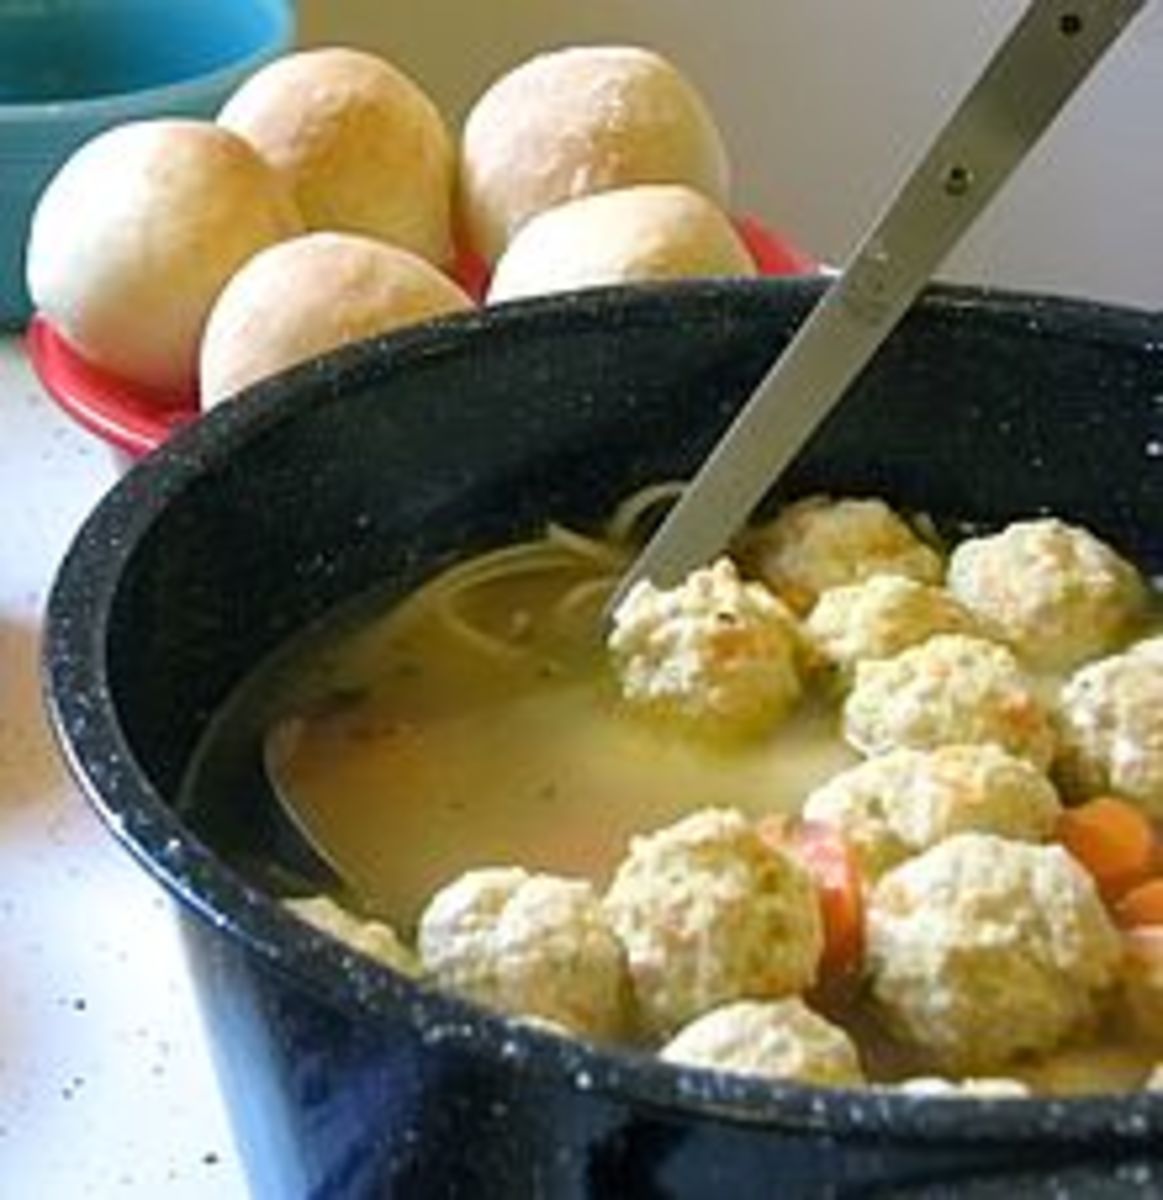 Here we have an example of the matzo balls made too small. Plus there is other stuff in the broth, which is okay--but not the way I would do it.